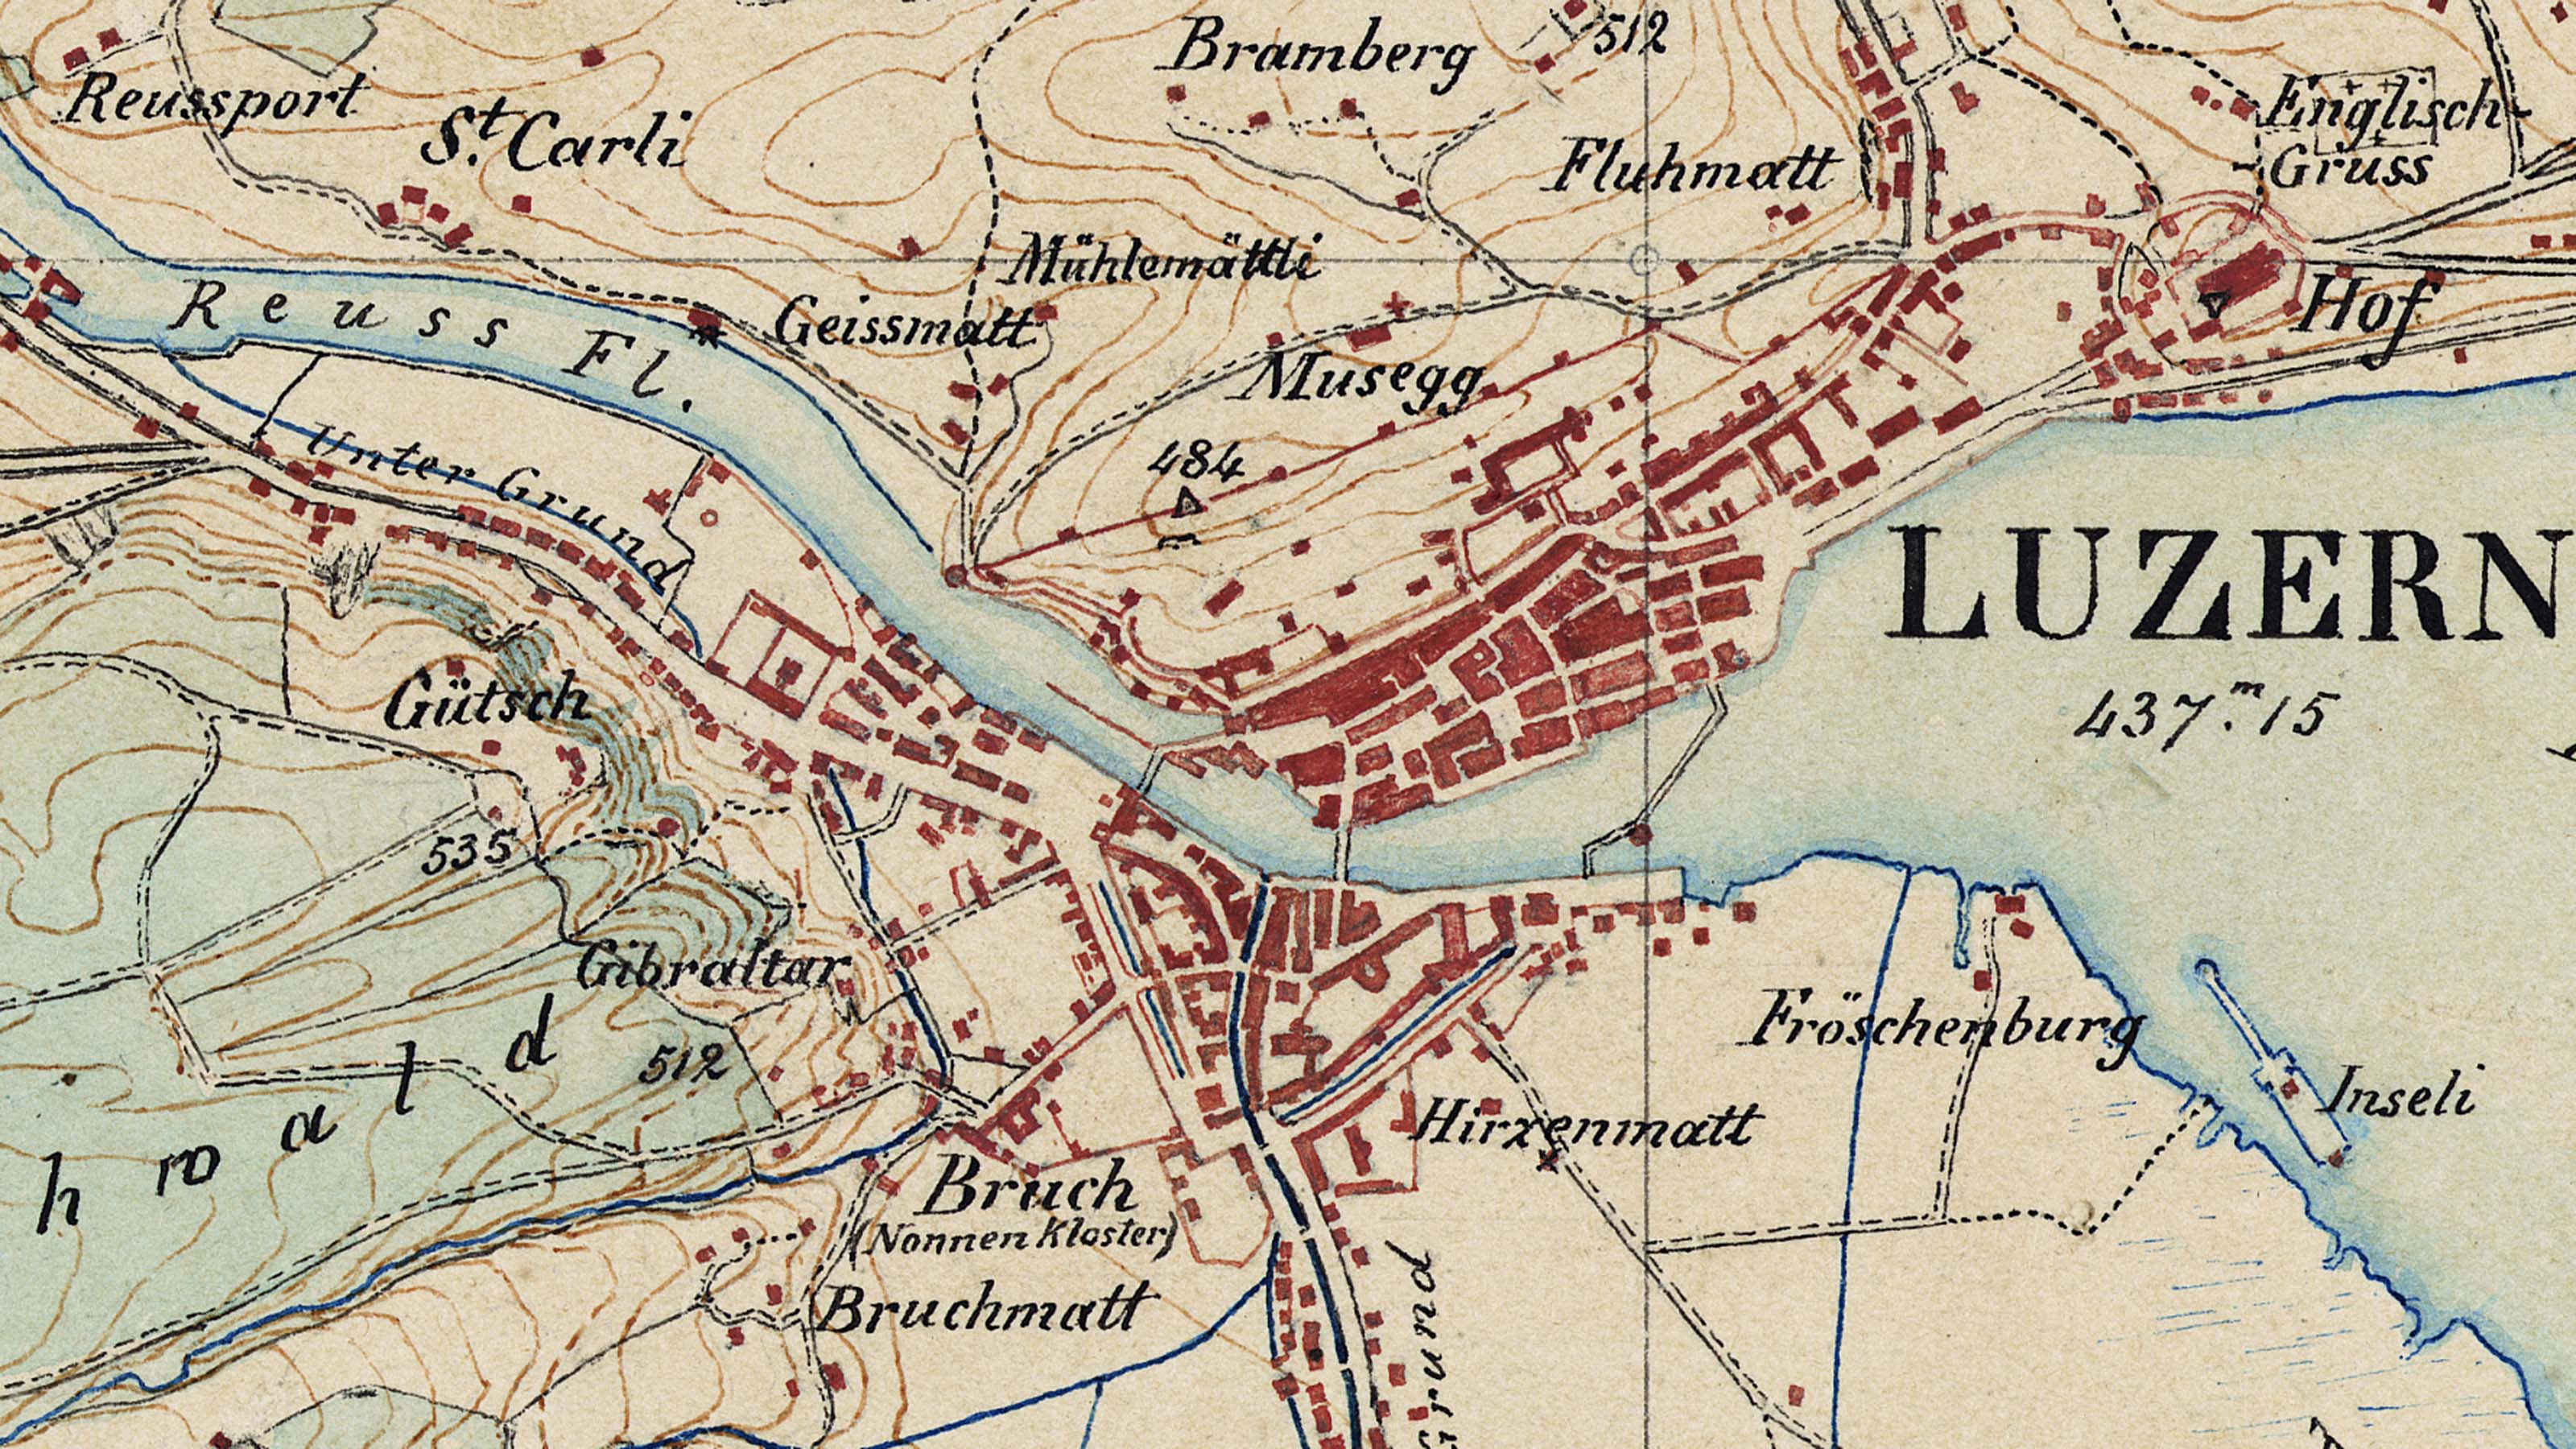 Section of an original 1:25 000 map from 1856, Lucerne. The hand-drawn map is multi-coloured and shows the historical centre of Lucerne, the Reuss River and Lake Lucerne.